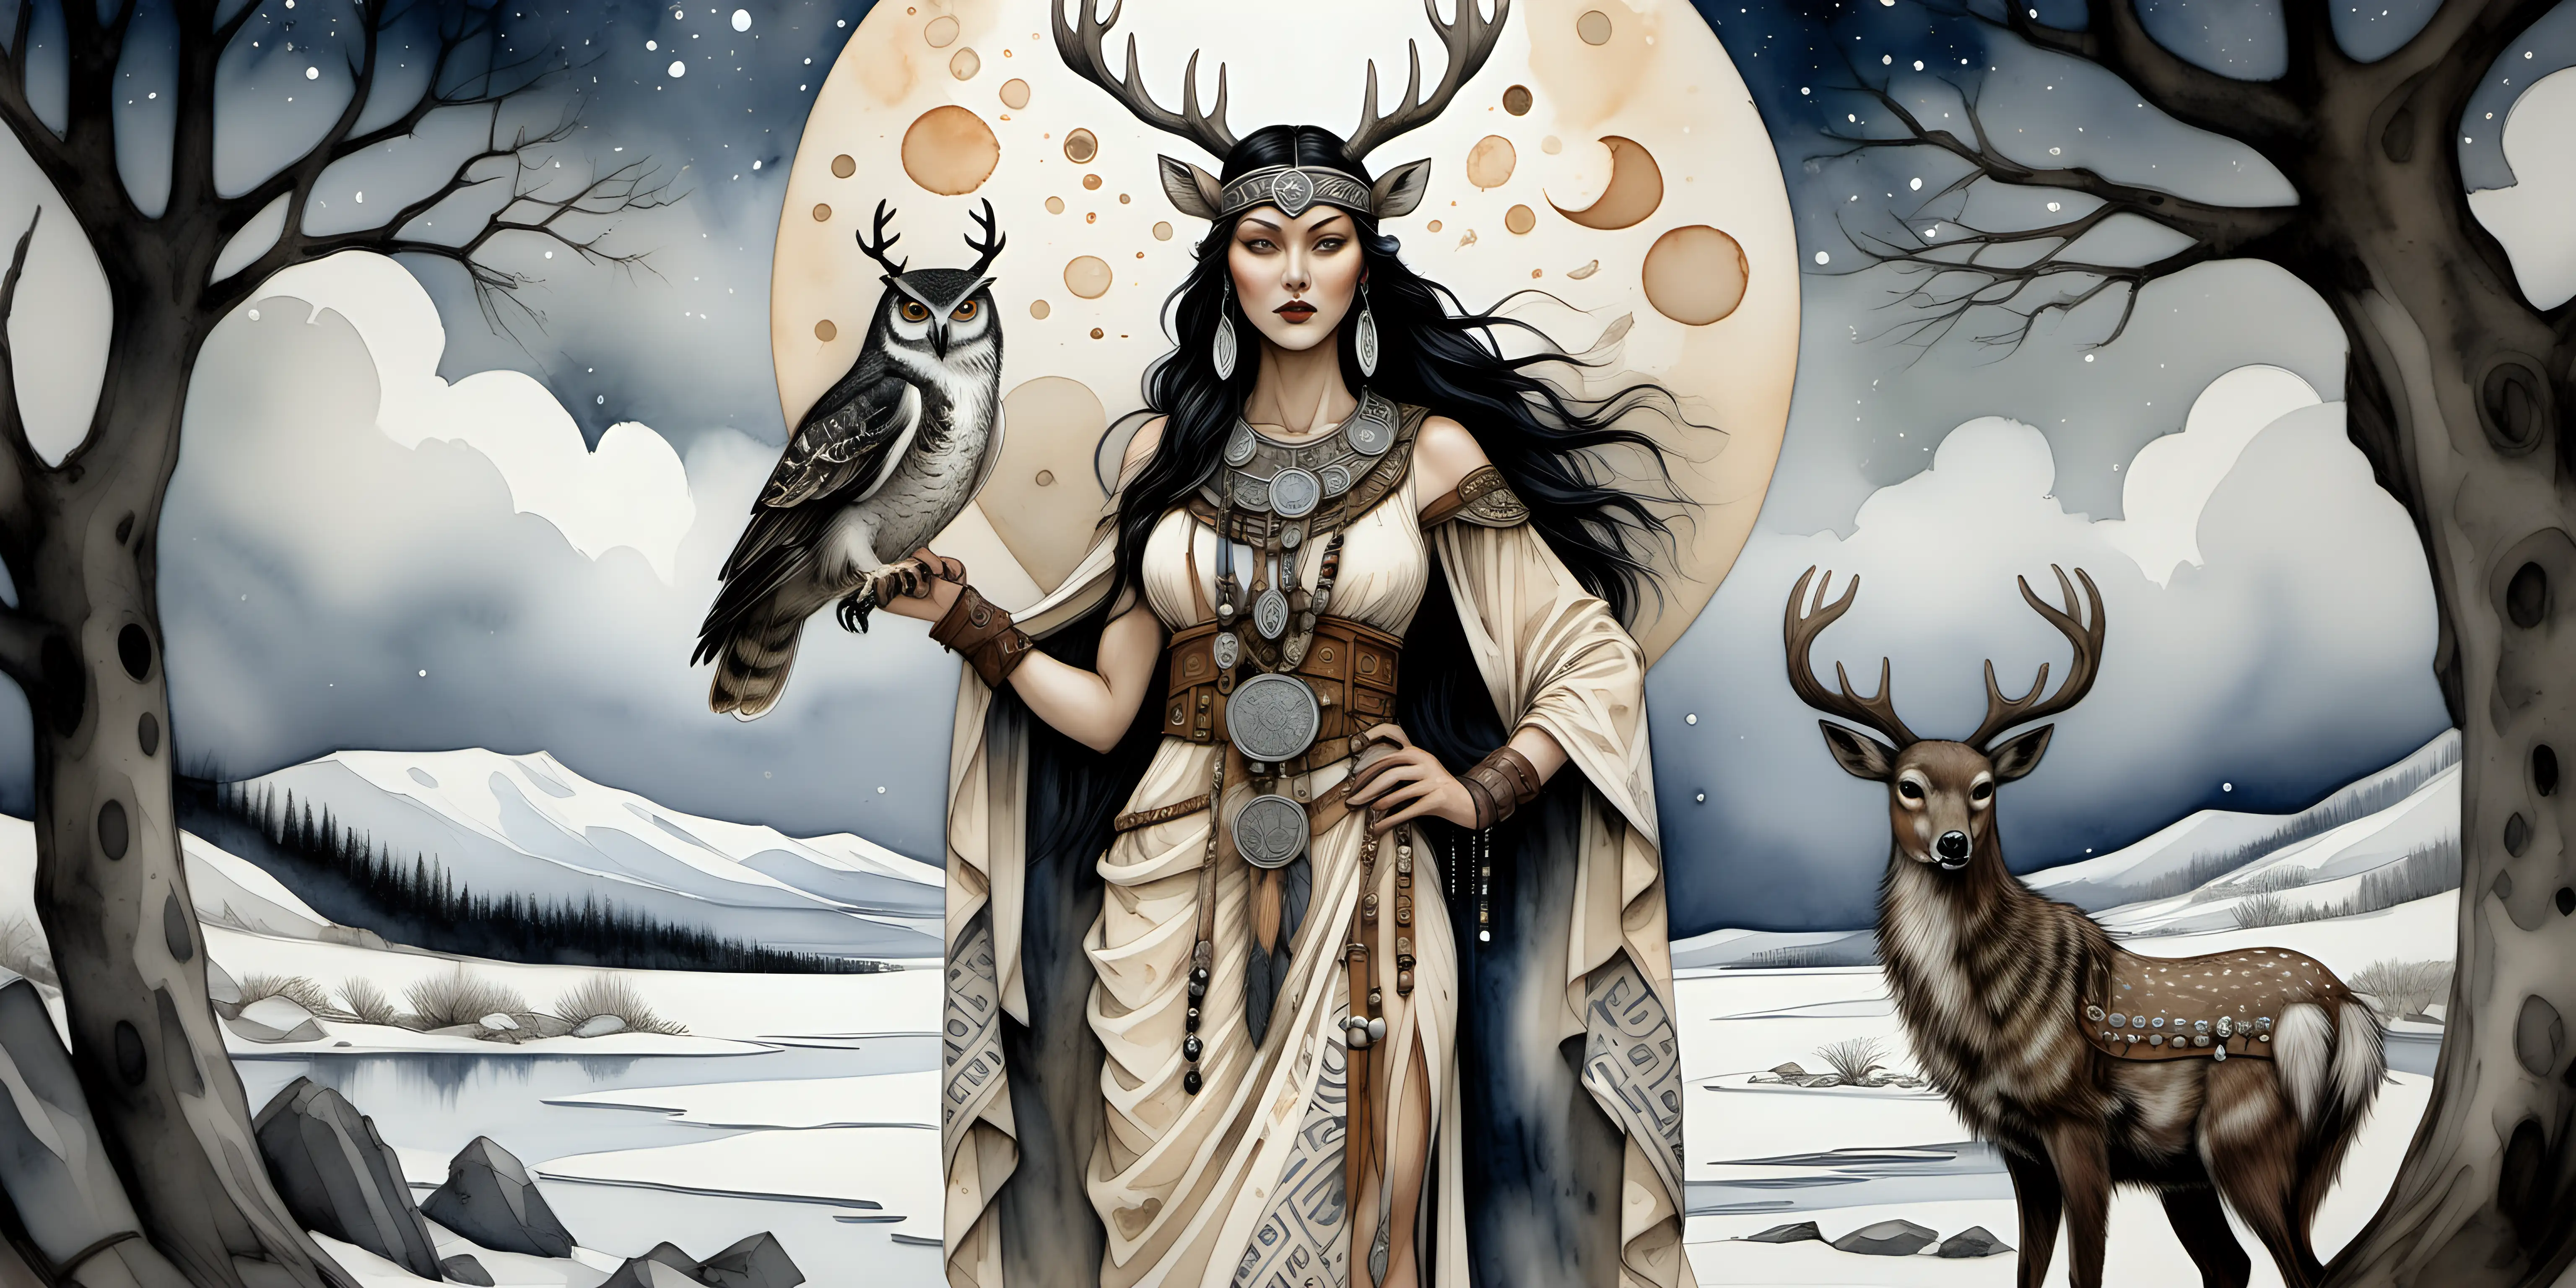 a water colour painting of a norse goddess , she has black hair, deer antlers on her head , her dress is beige in colour with viking symbols around the neck of her dress, she has a deerskin waistbag with black feathers dangling from the bag with beautiful carved silver beads, she has a silver wolf at her side, the sky is dark with a bright full moon, an owl is perched in the tree beside her. there are viking symbols carved on the rocks under the tree. 